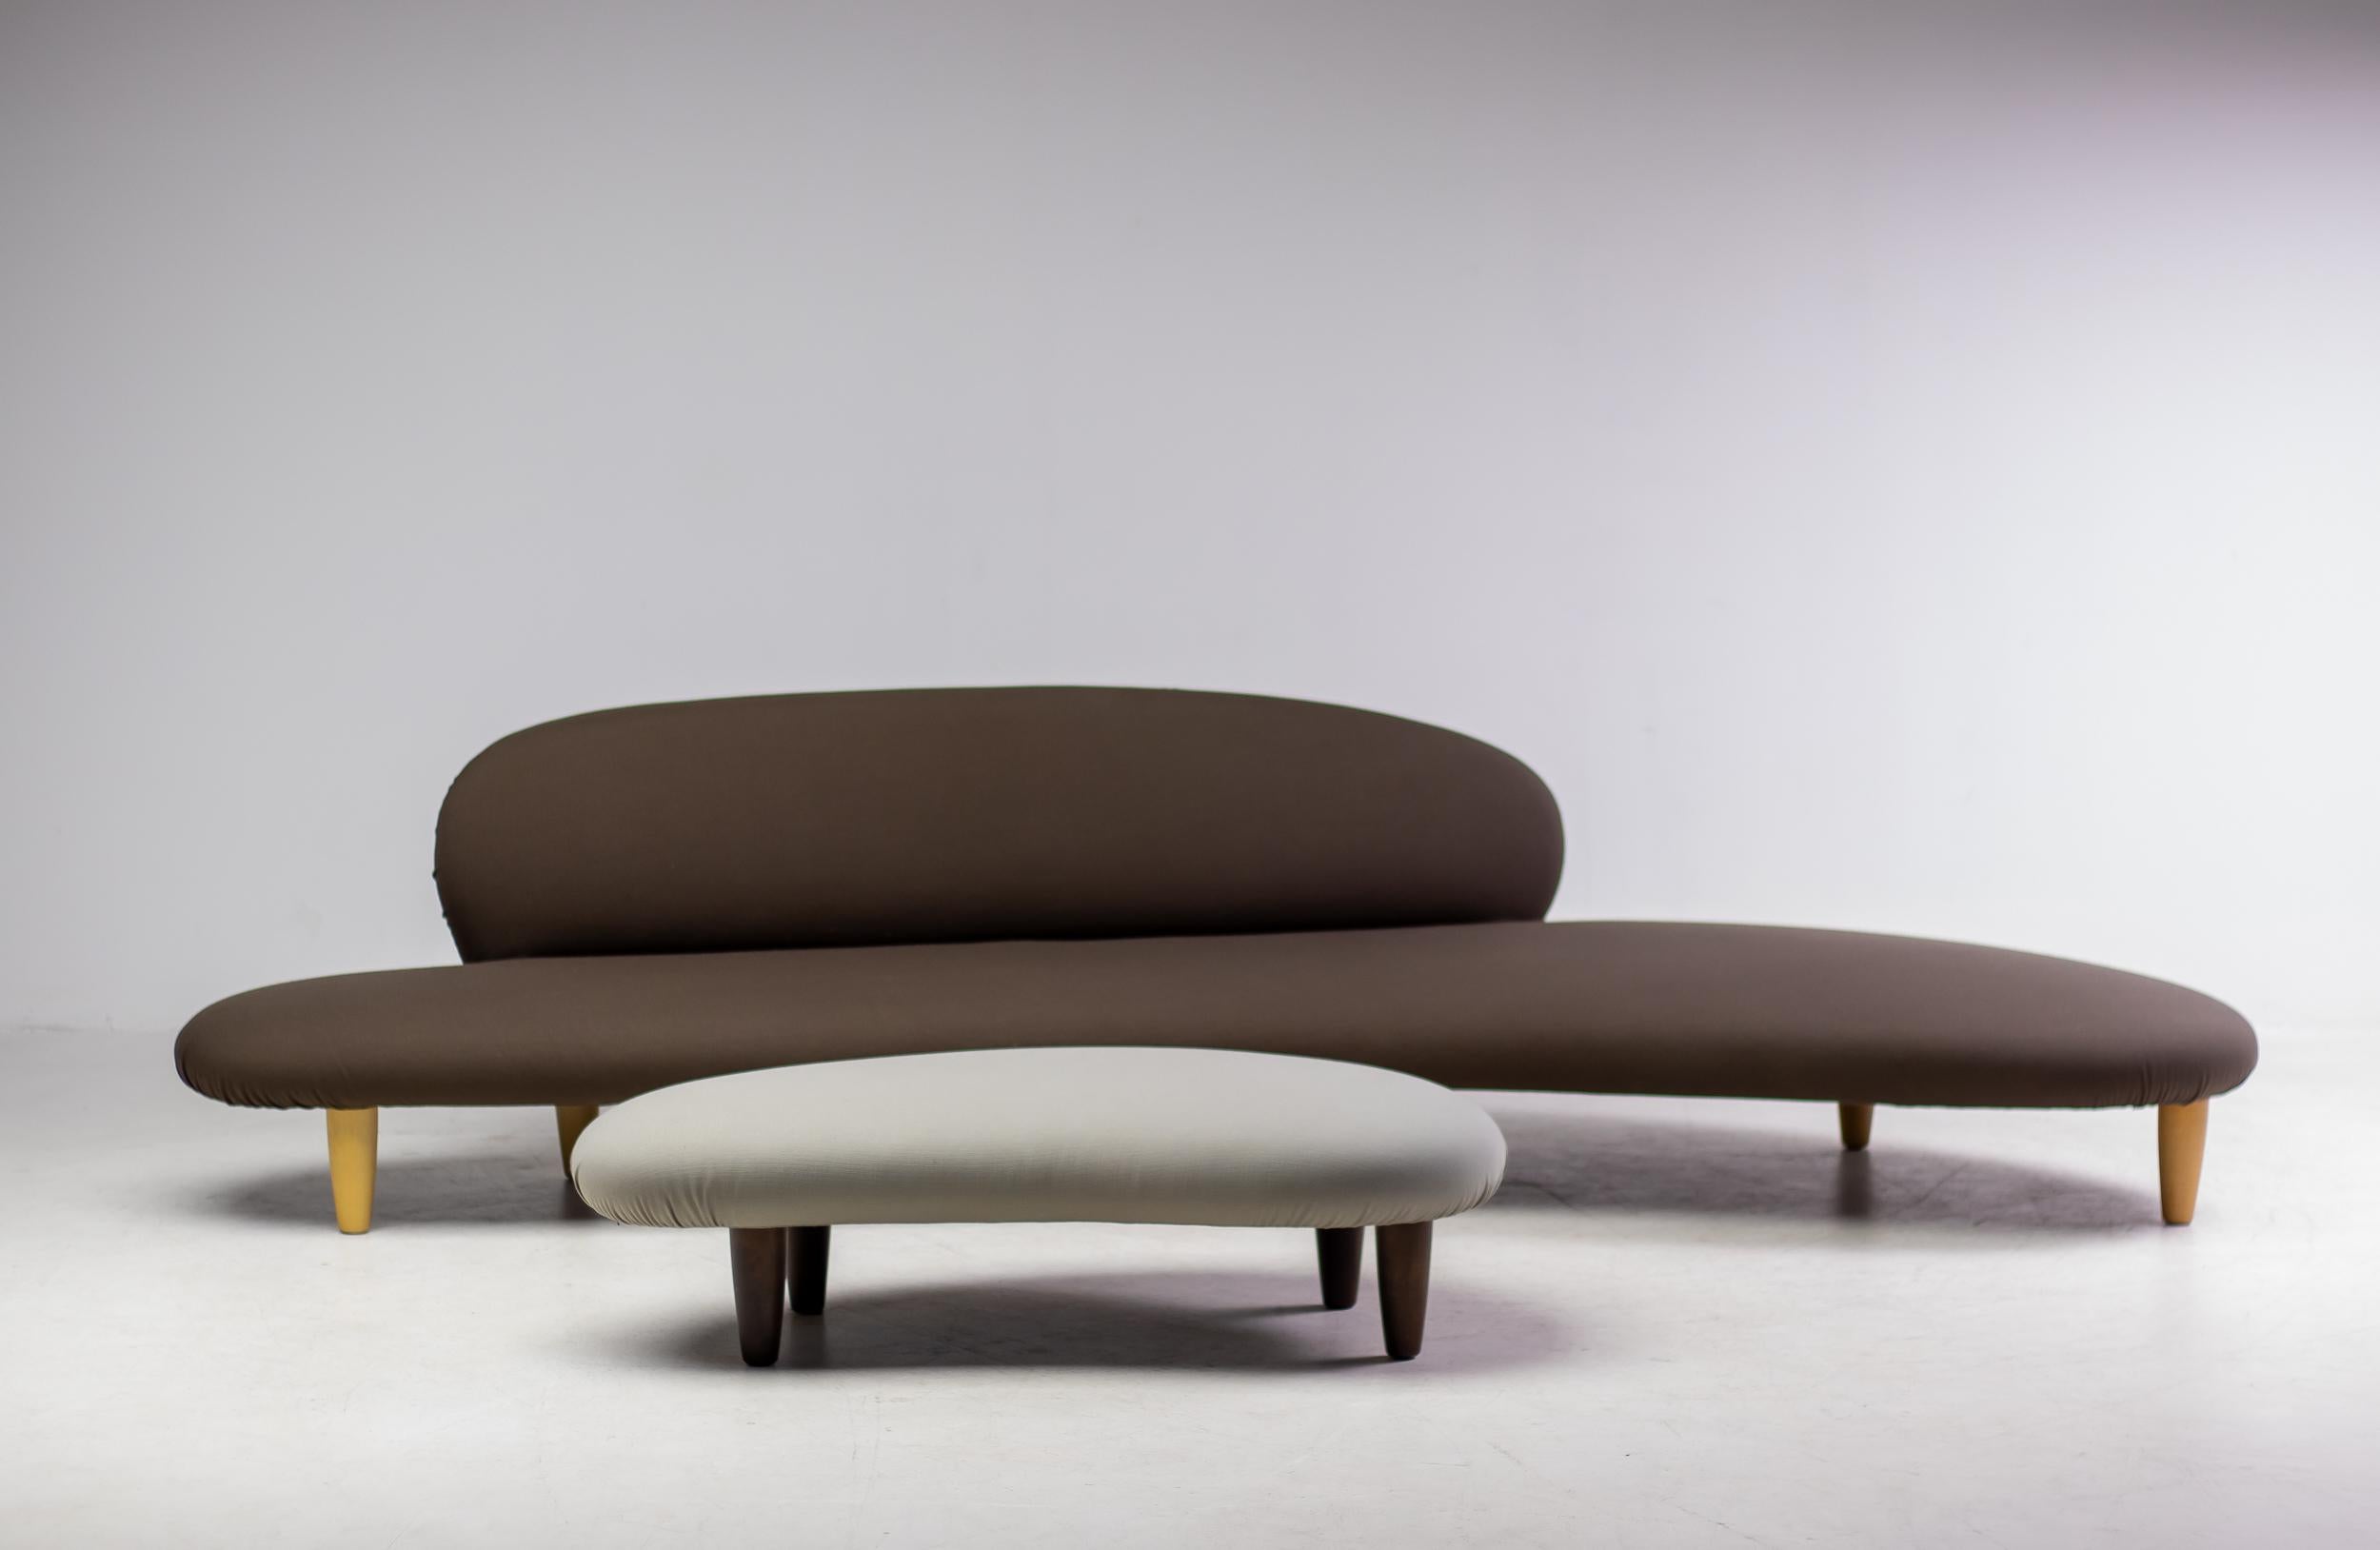 The sculptural quality of Noguchi's design vocabulary finds expression in the Freeform Sofa: it is entirely different from other designs of the same period, appearing in combination with the Ottoman like an enlarged sculpture of flat, rounded river